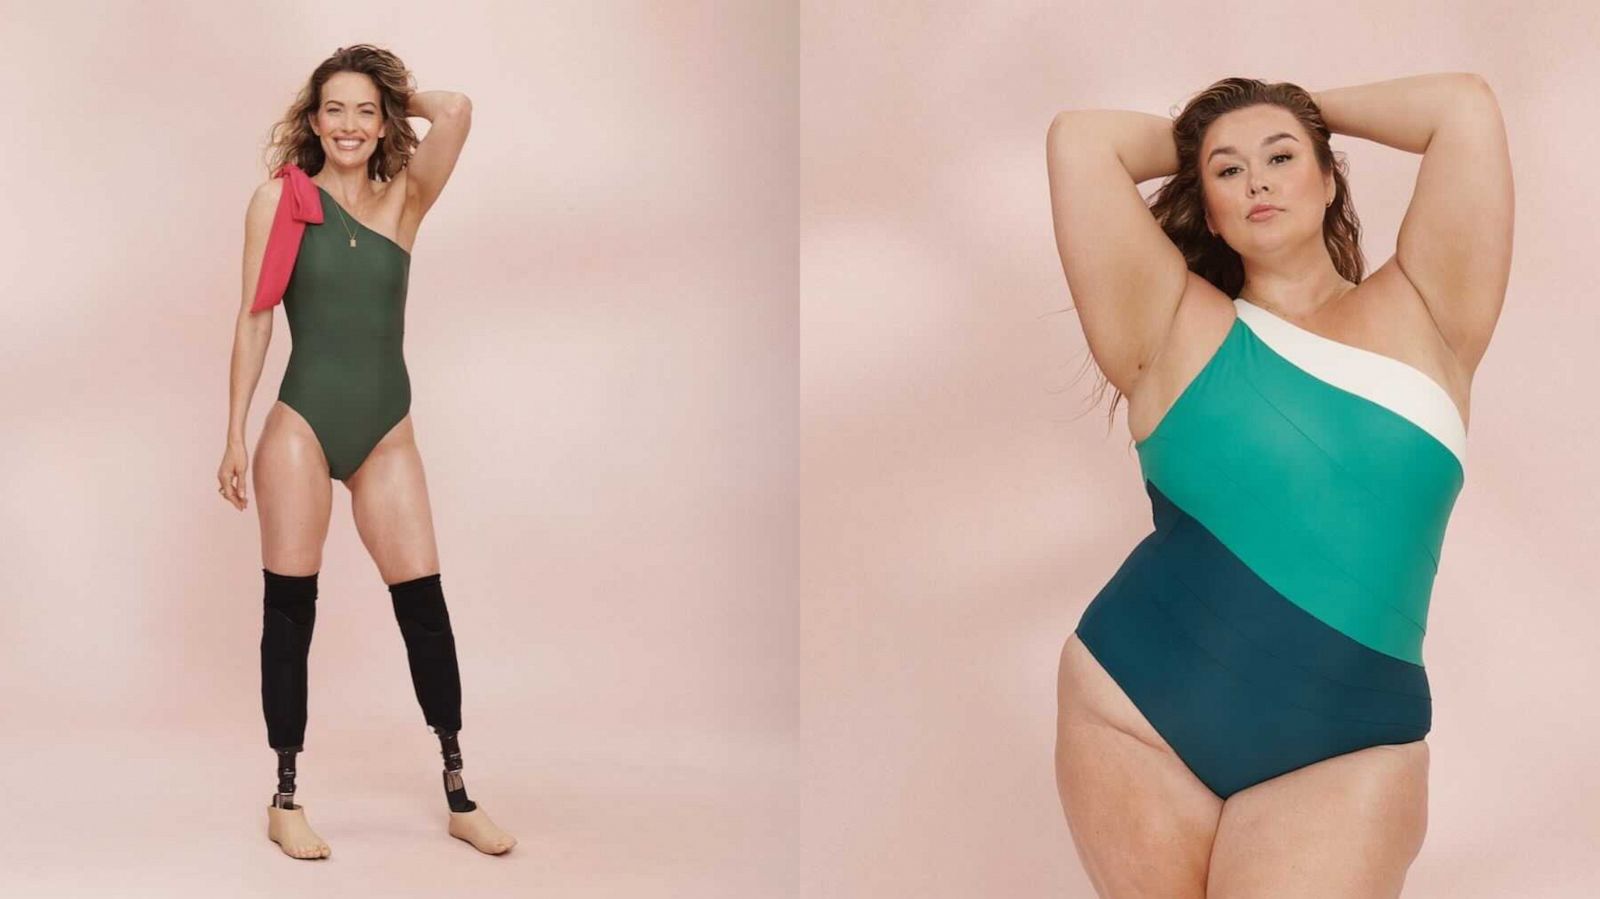 Summersalt Swim Review: The 3 Best Bathing Suits and Looks